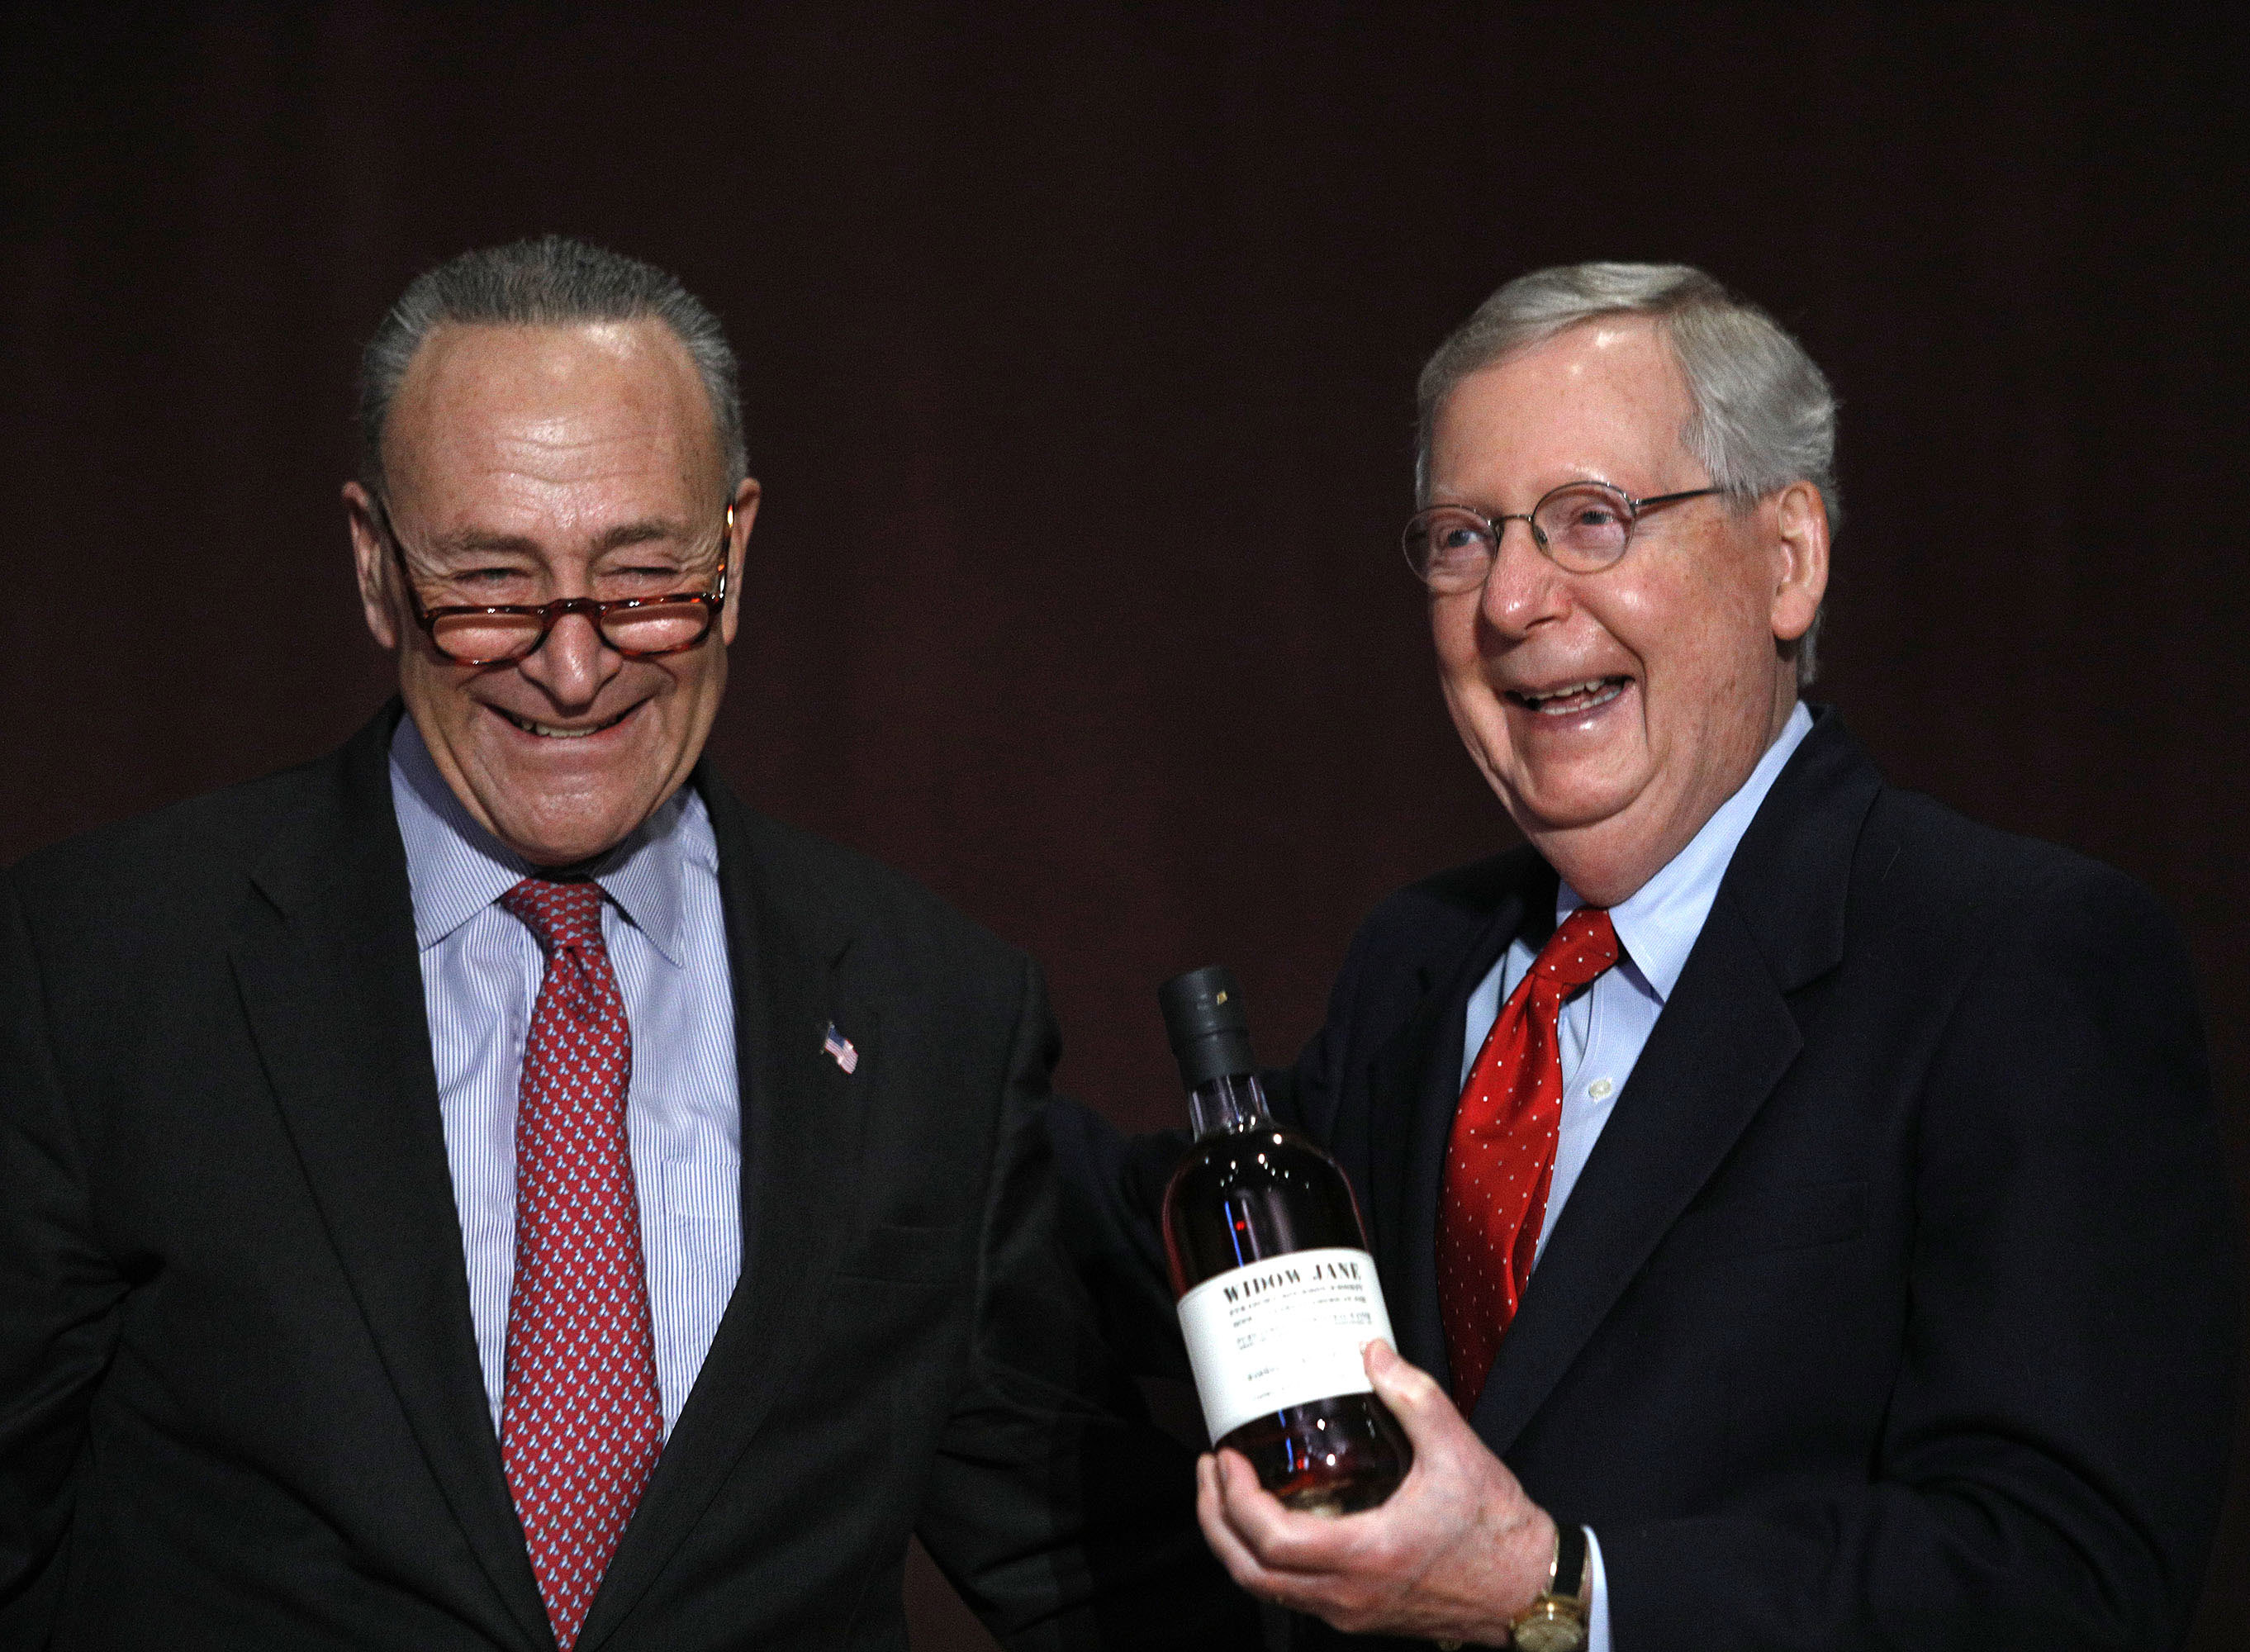 U.S. Senate Democratic Leader Chuck Schumer  (left) (D-NY), presents U.S. Senate Majority Leader Mitch McConnell (right) (R-KY) with a bottle of bourbon at the University of Louisville's McConnell Center where Schumer was scheduled to speak February 12, 2018 in Louisville, Kentucky. (Bill Pugliano&mdash;Getty Images)